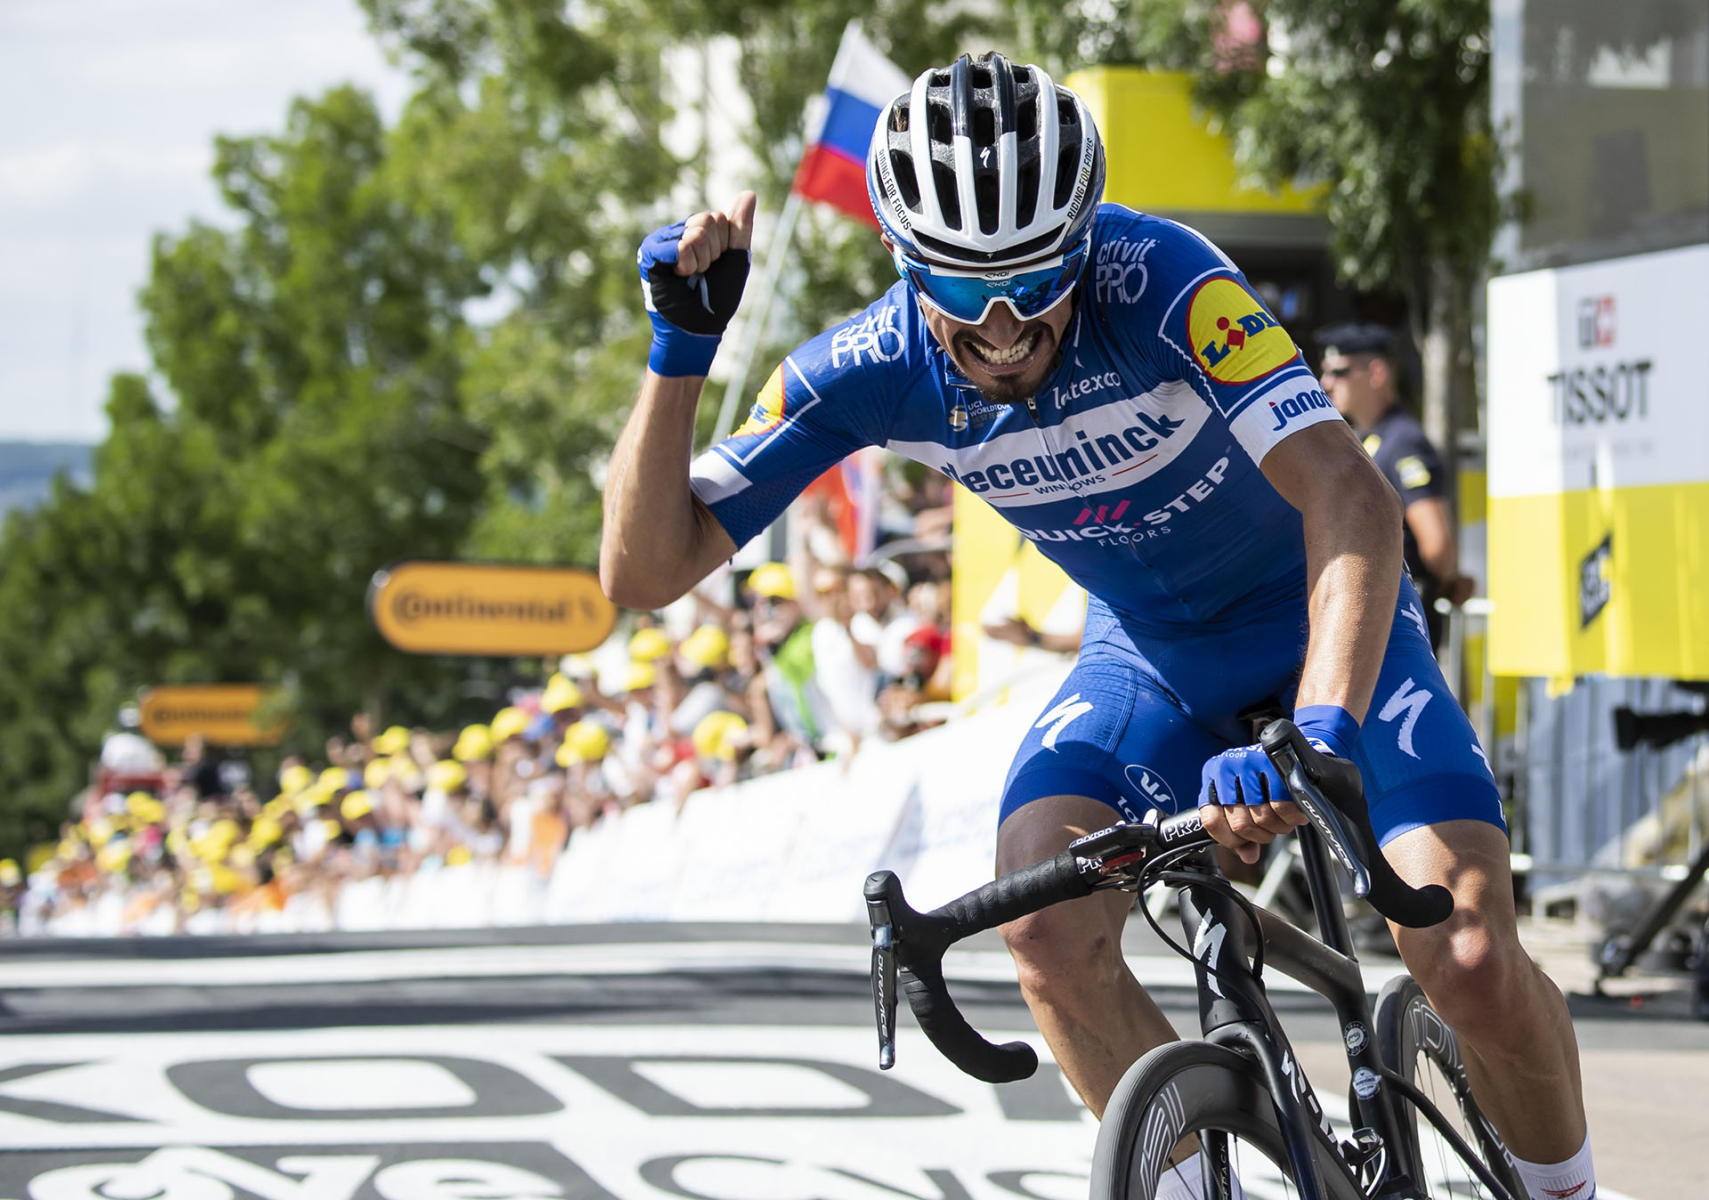 Tour de France 2019 - Stage Three - Julian Alaphilippe celebrates winning the stage